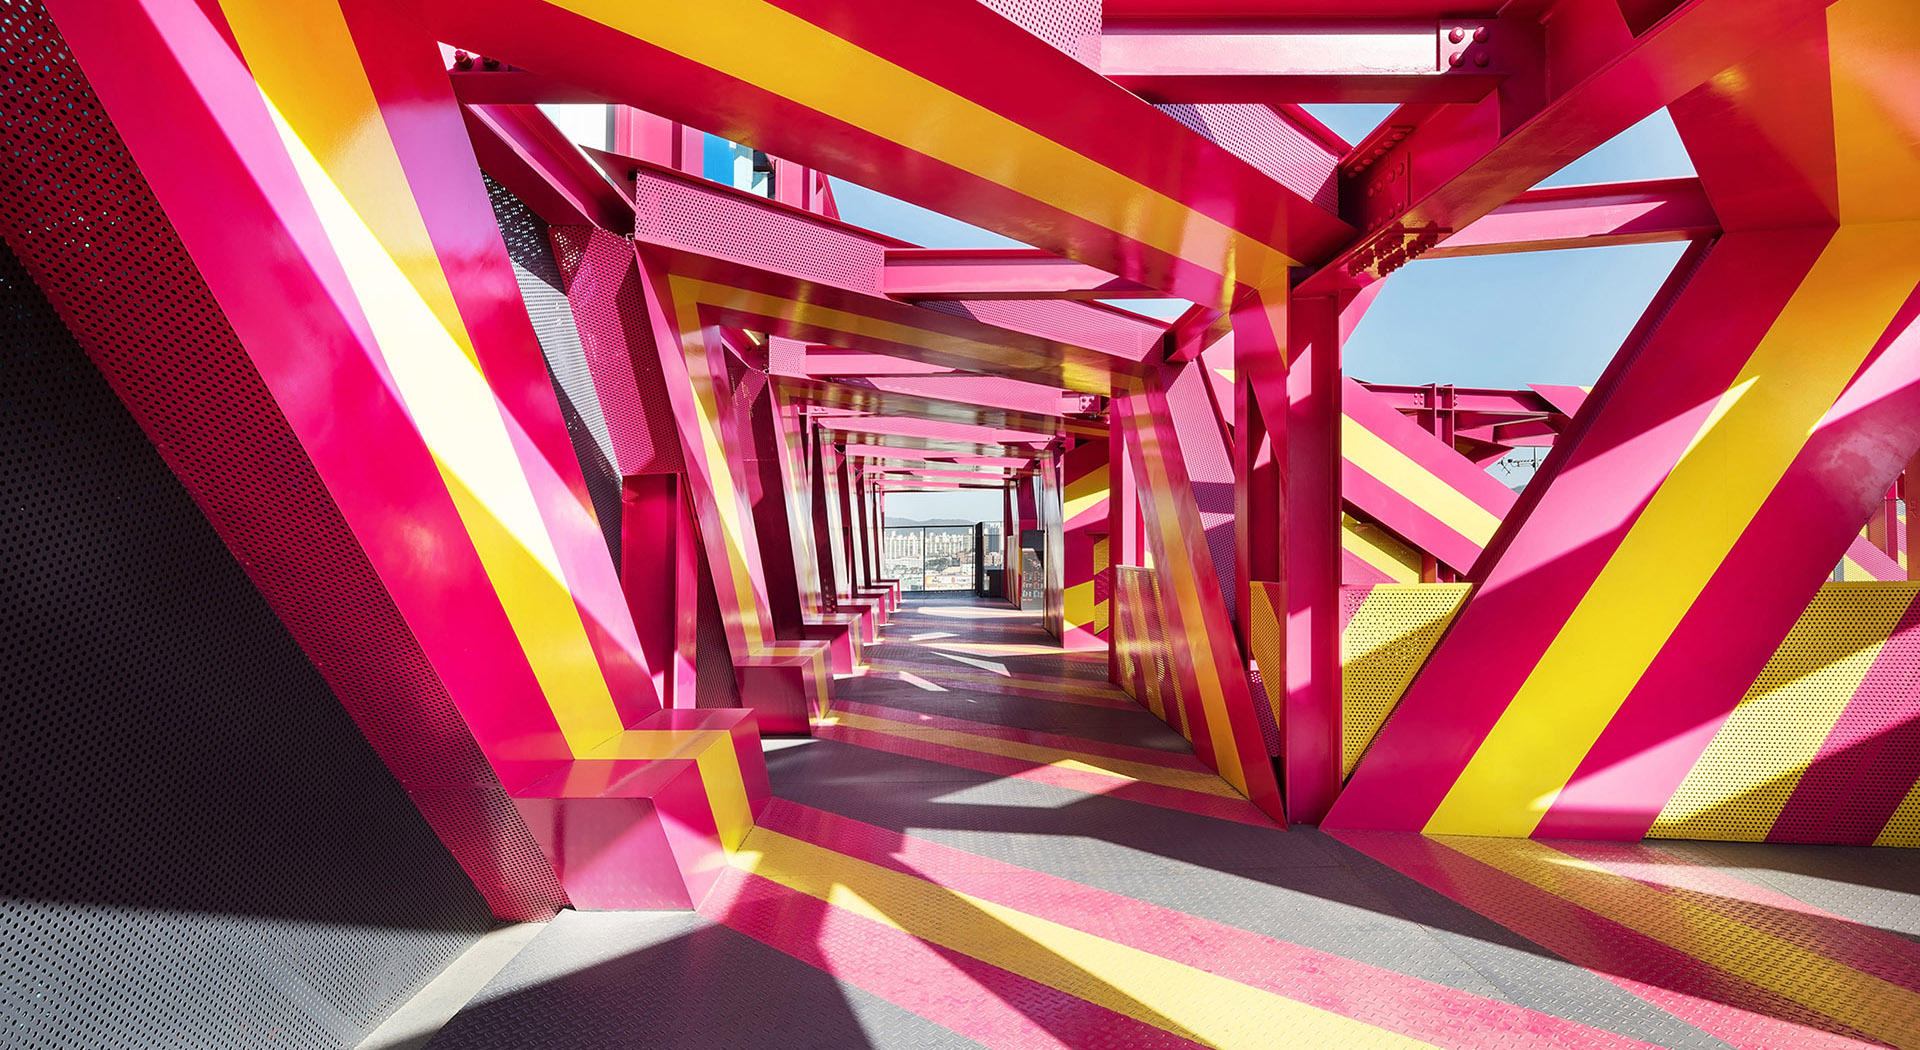 Architecture of Autonomy: Interactive and attractive installation for a visual identity